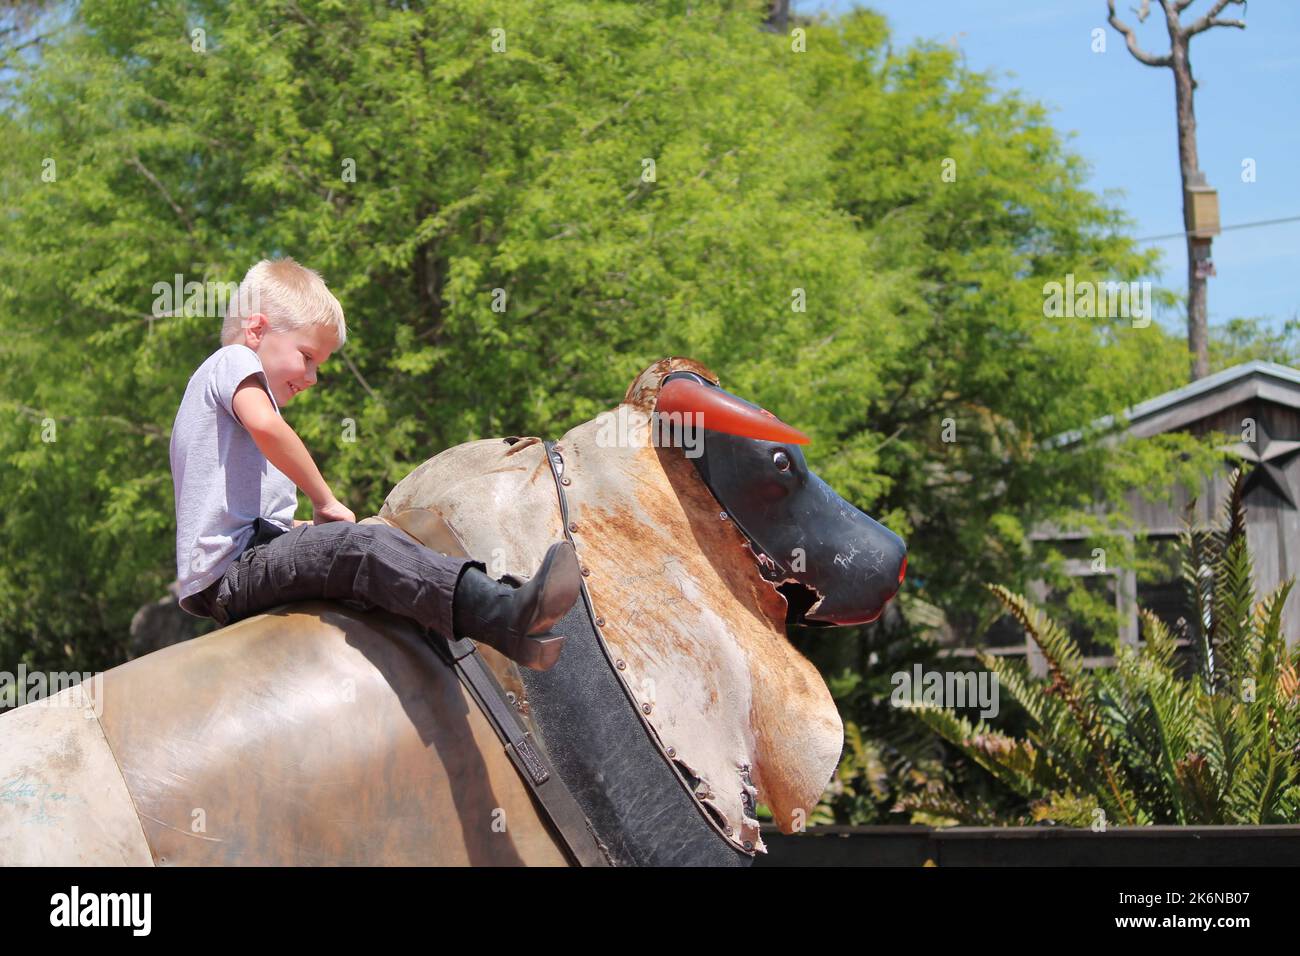 A young boy, wearing cowboy boots, riding on the back of a mechanical bull. Stock Photo